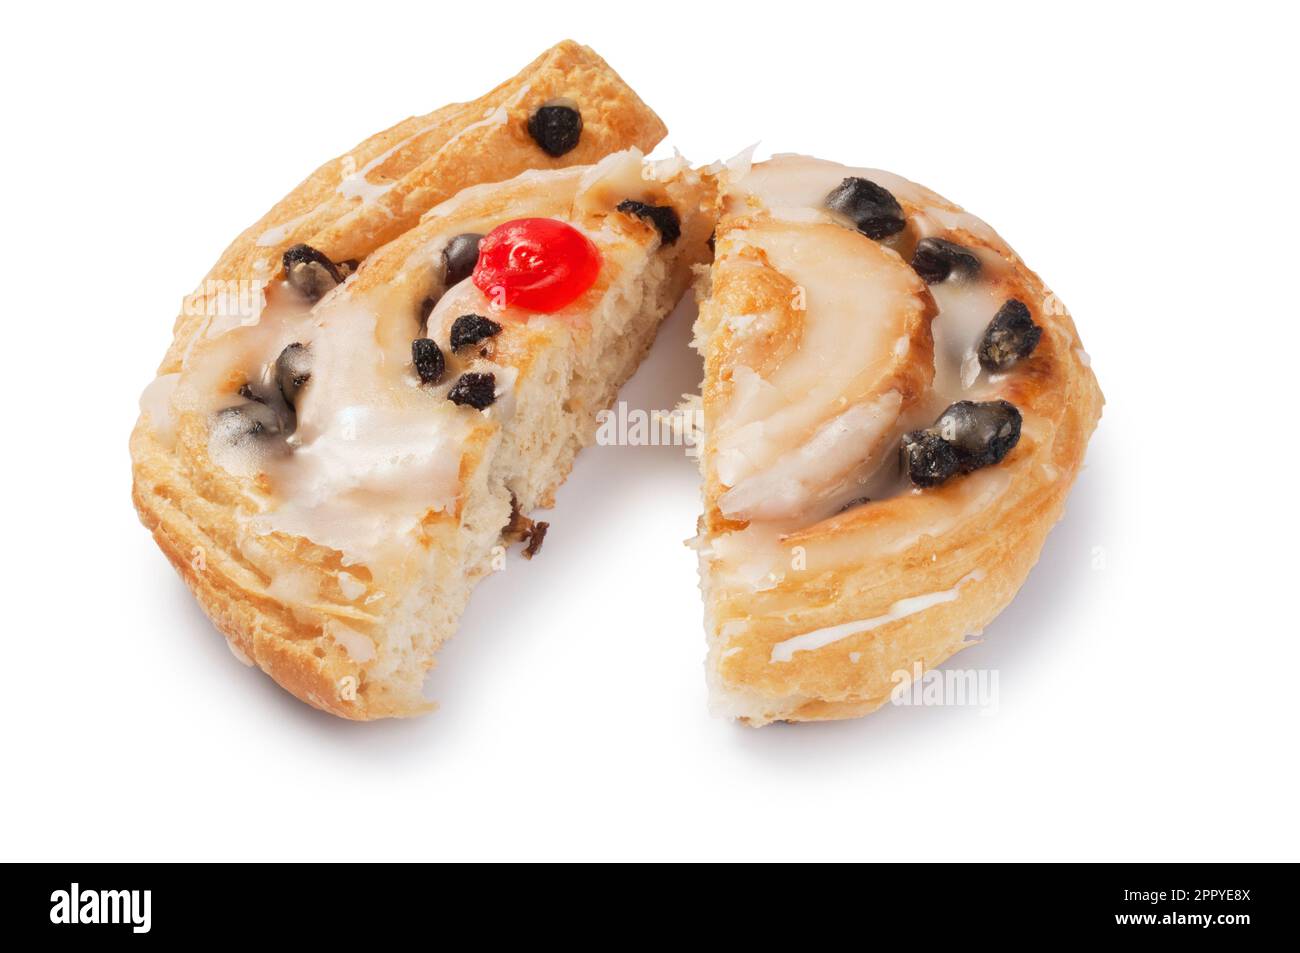 studio shot of a Danish Pastry cut out against a white background - John Gollop Stock Photo